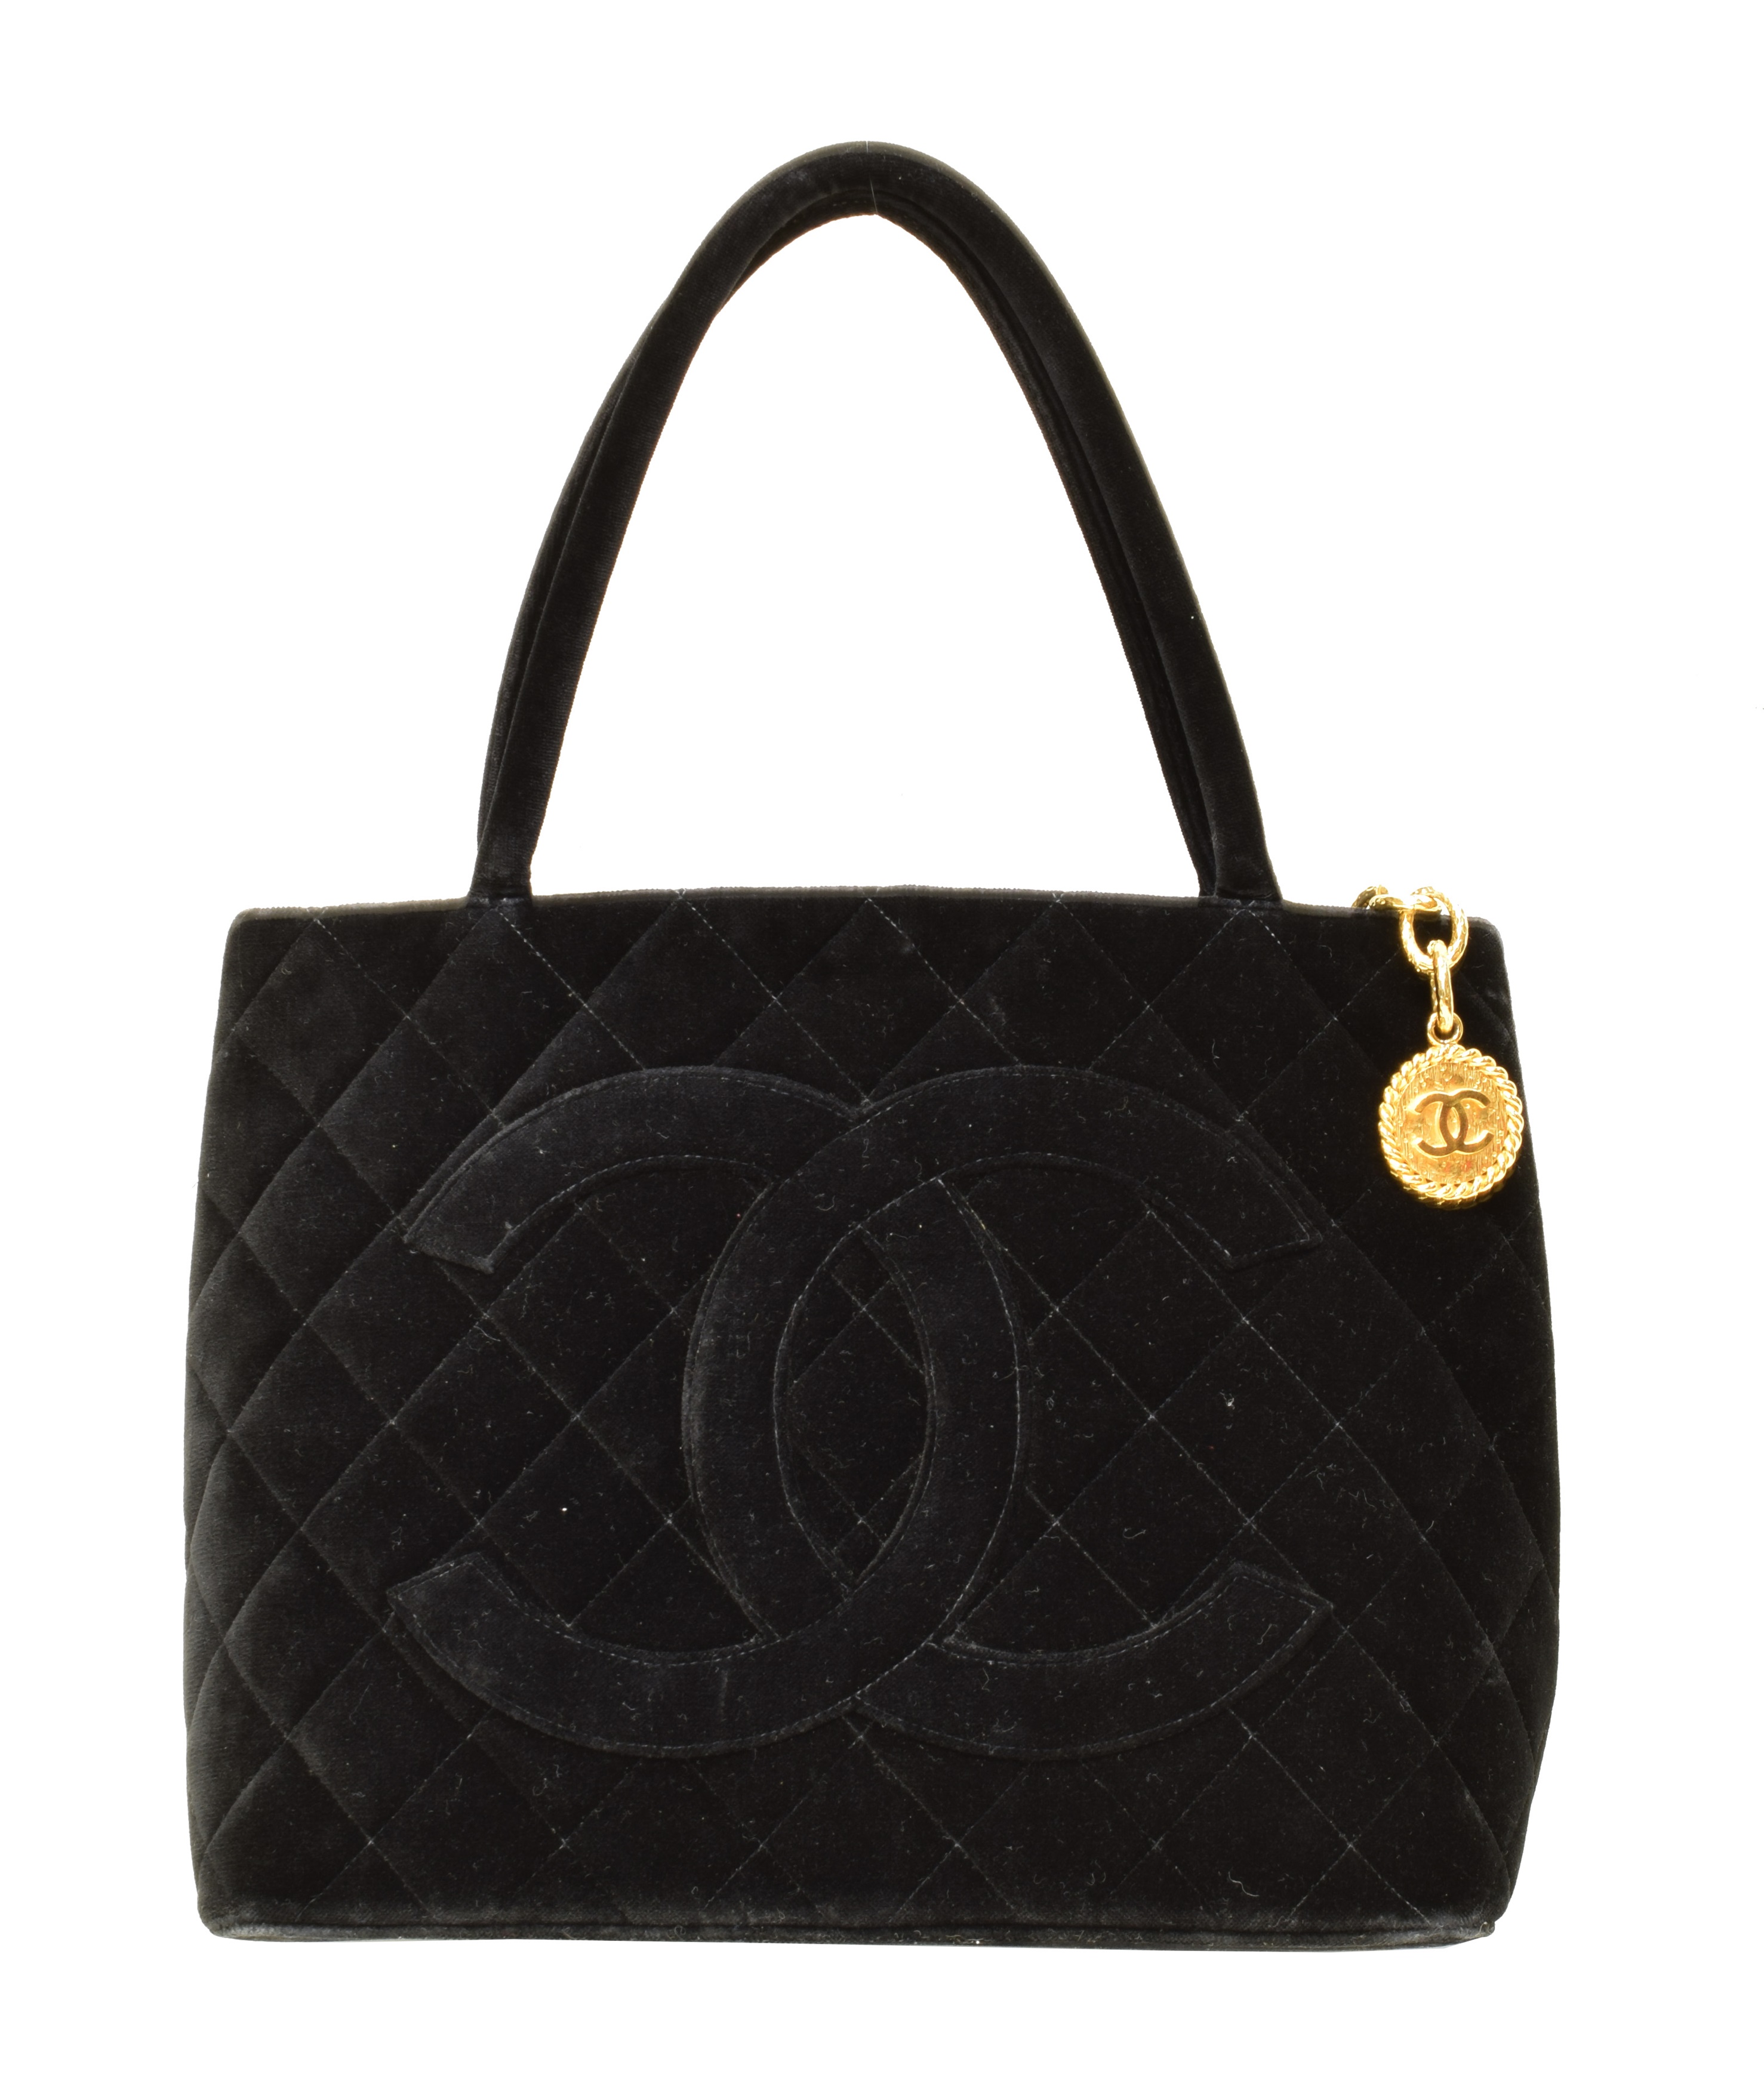 A Chanel Medallion Shoulder Bag, circa 1997-9, the black velvet quilted canvas exterior with black canvas strap and gold tone hardware, serial no. 5411744.